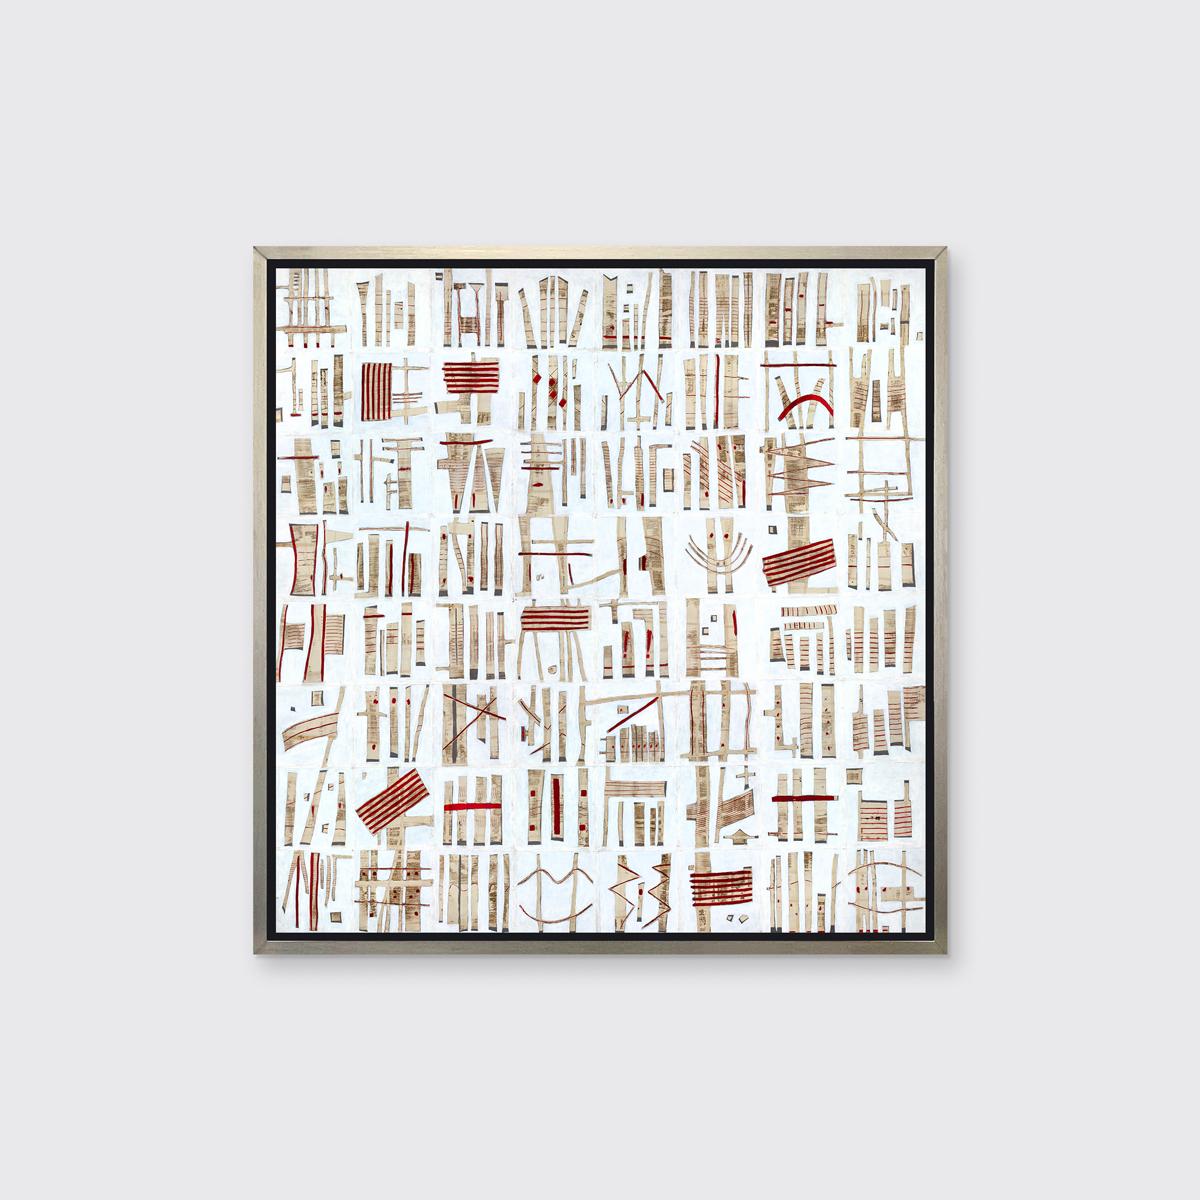 Sofie Swann Abstract Print - "Bedtime Story, " Framed Limited Edition Giclee Print, 24" x 24"